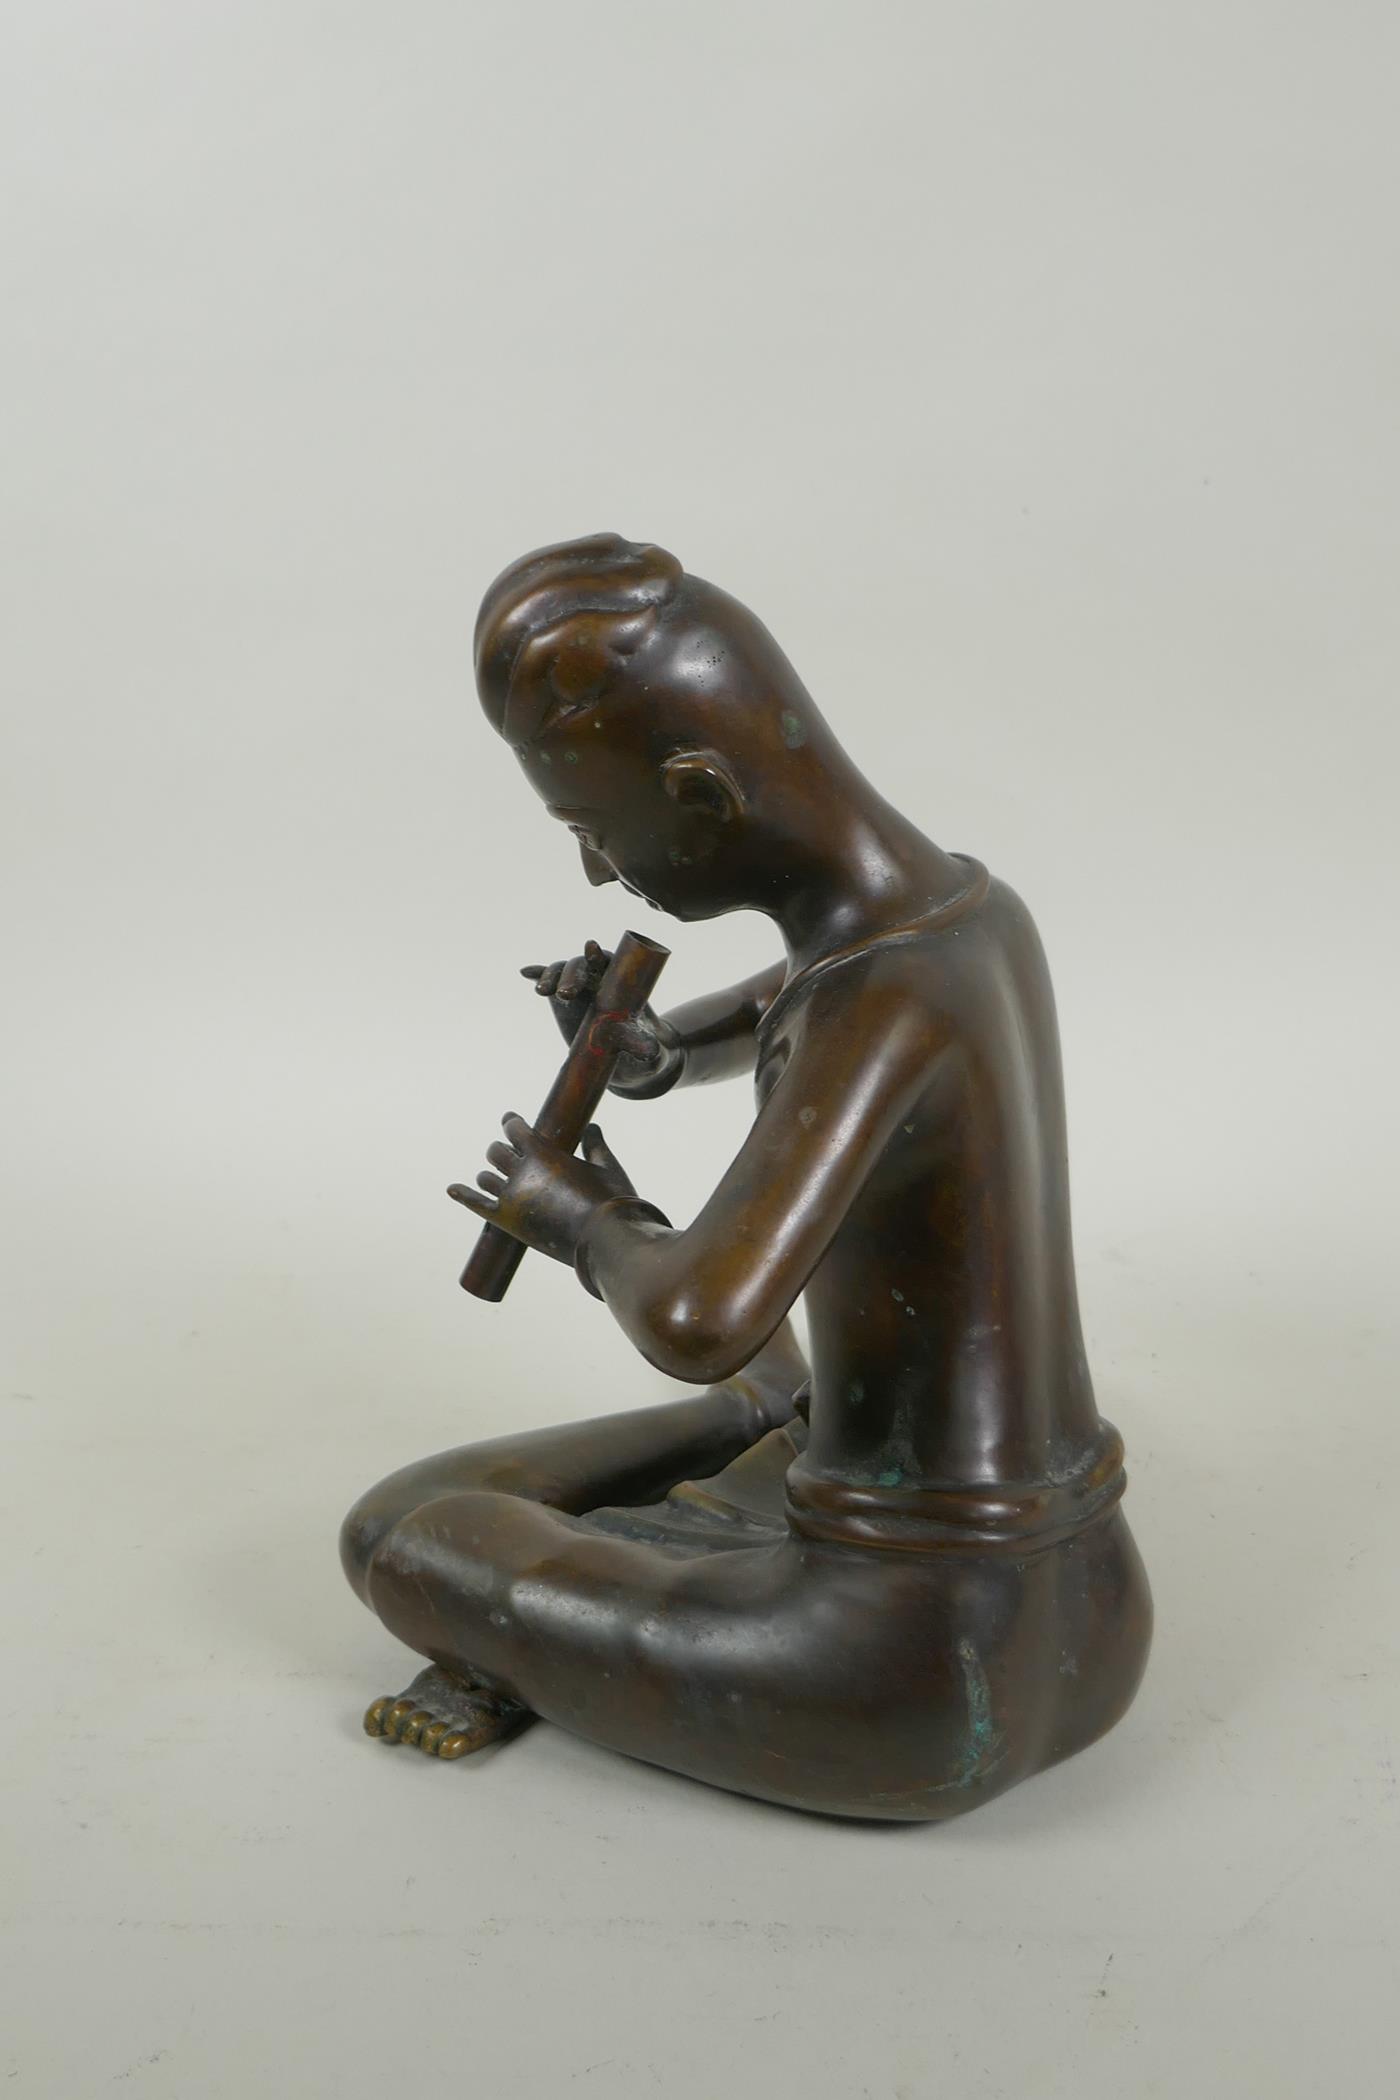 A Thai filled bronze figure of a musician playing the flute, 23cm high - Image 2 of 4